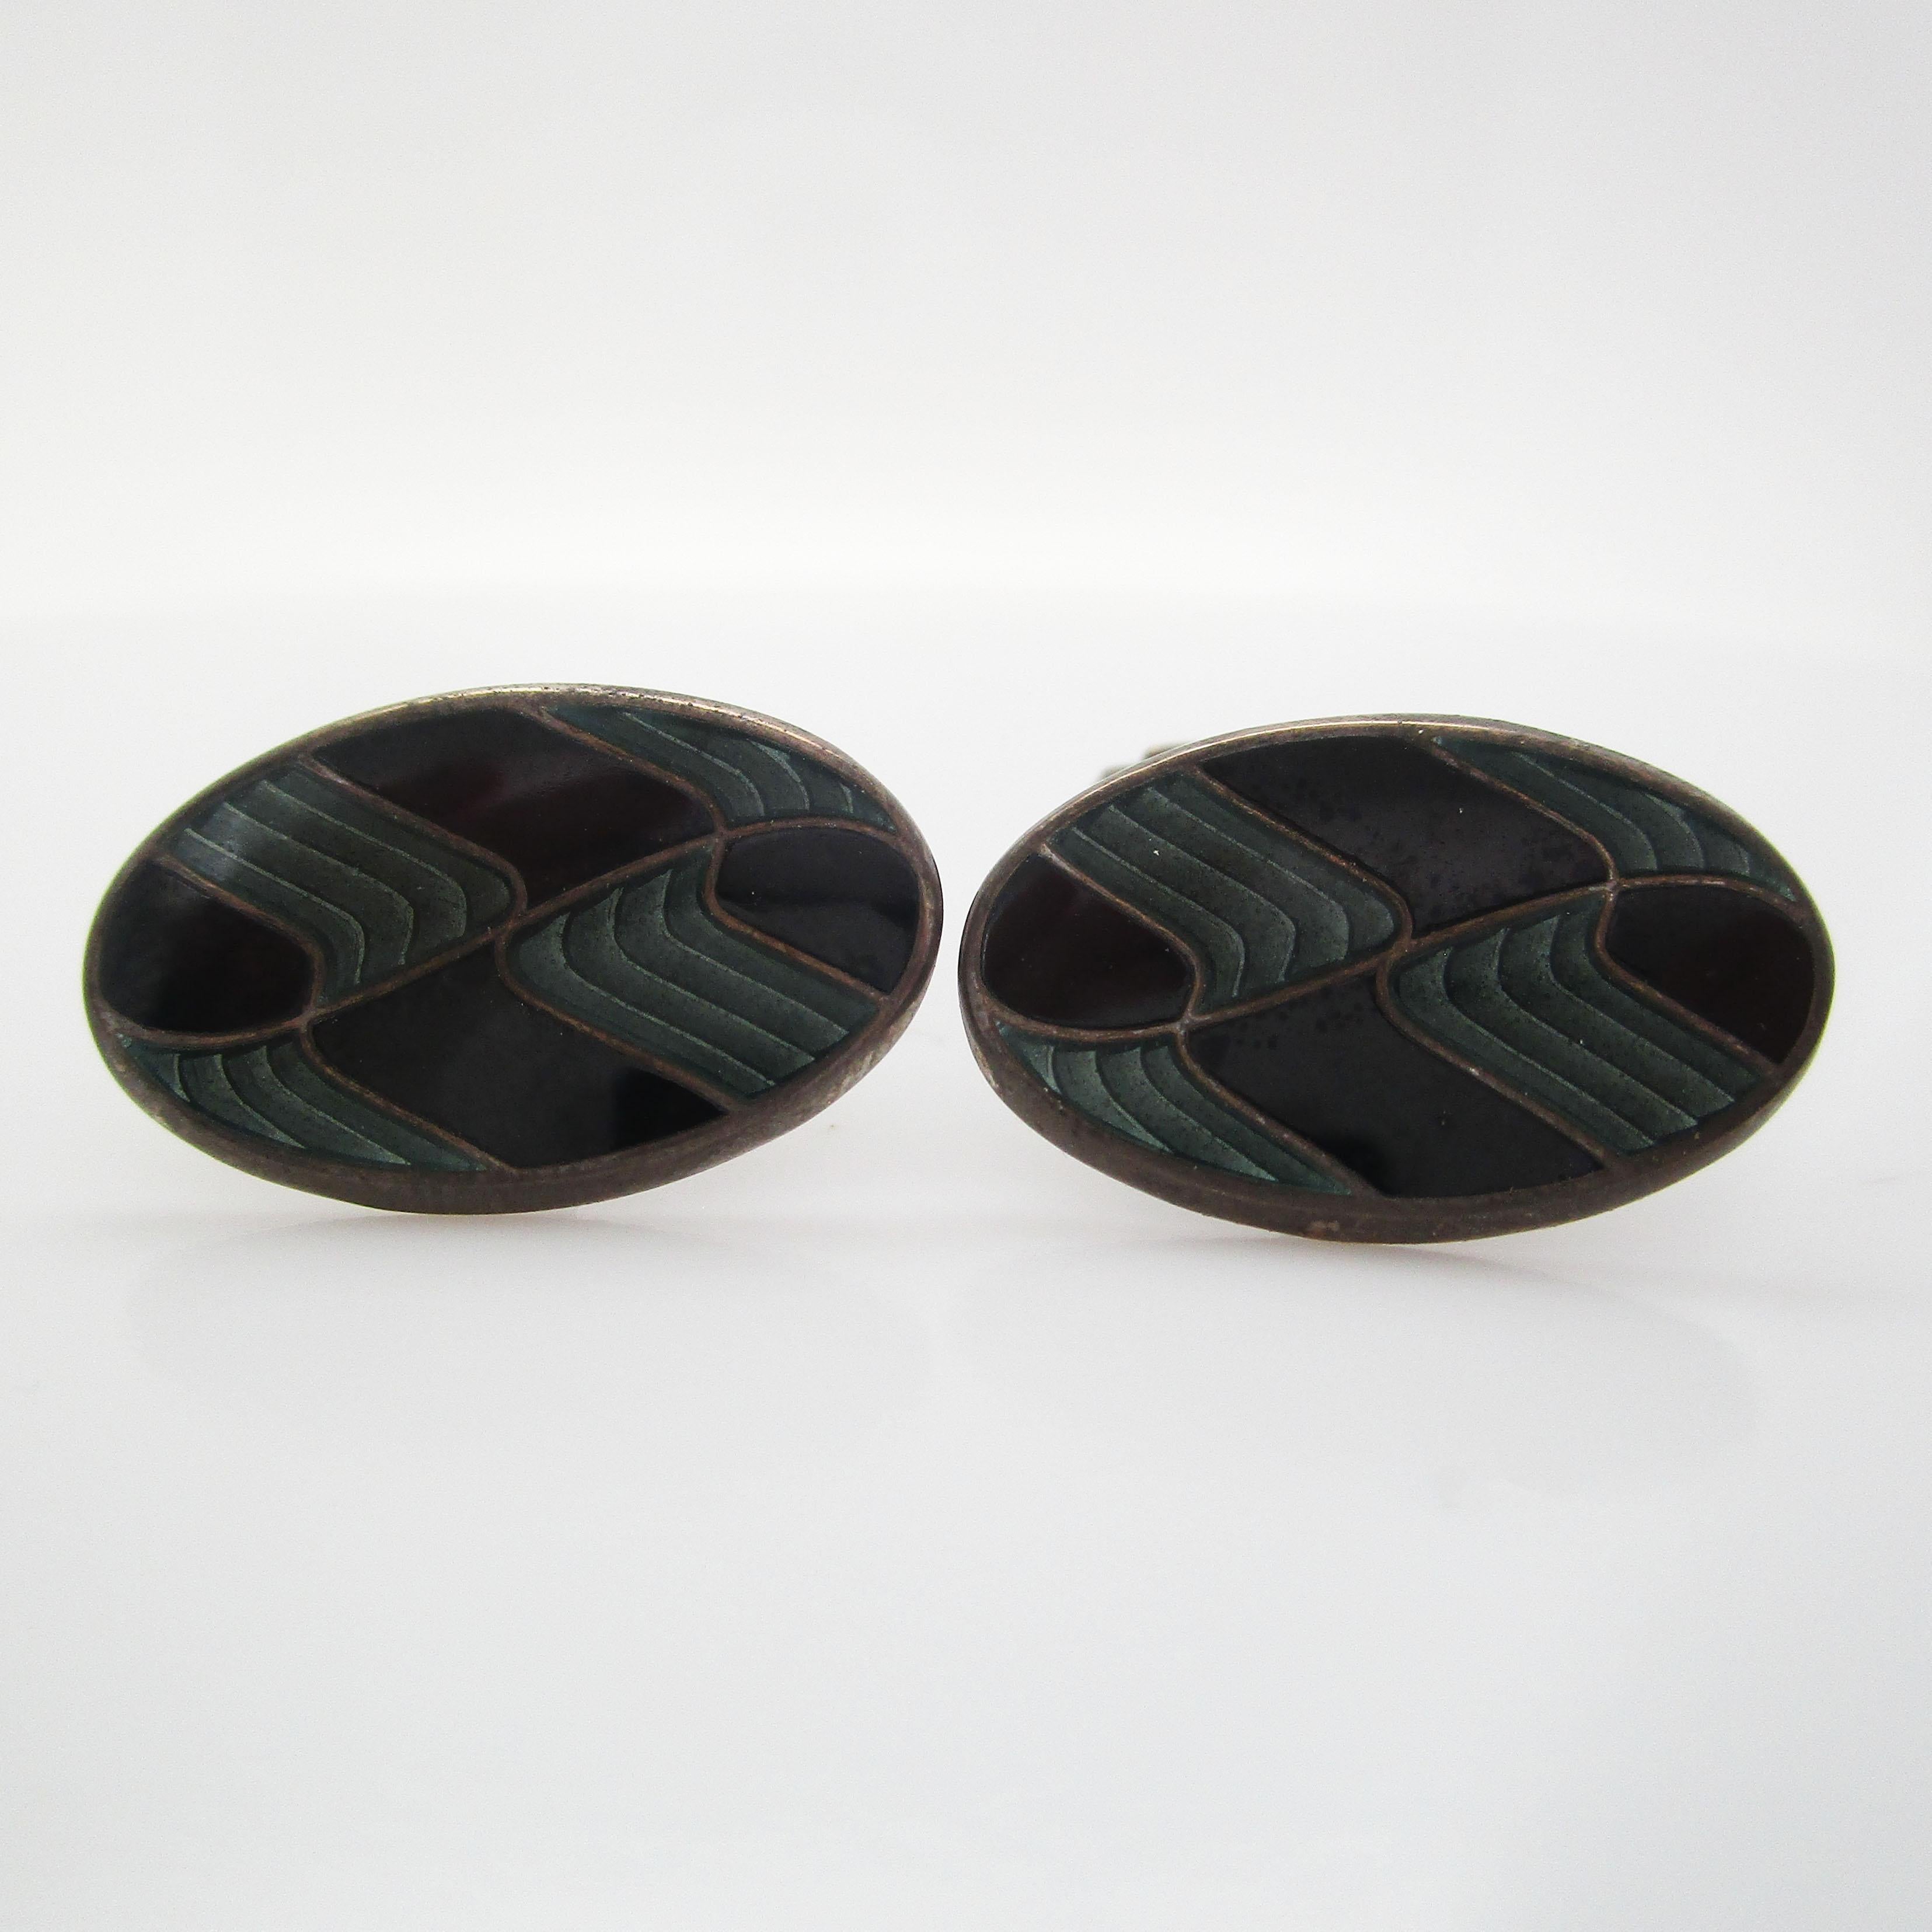 This is a fantastic pair of gentleman’s cufflinks in sterling silver with beautiful black and gray enamel panels. The enamel is in an elegant wave design that creates the perfect picture of distinguished excellence that every gentleman strives for.